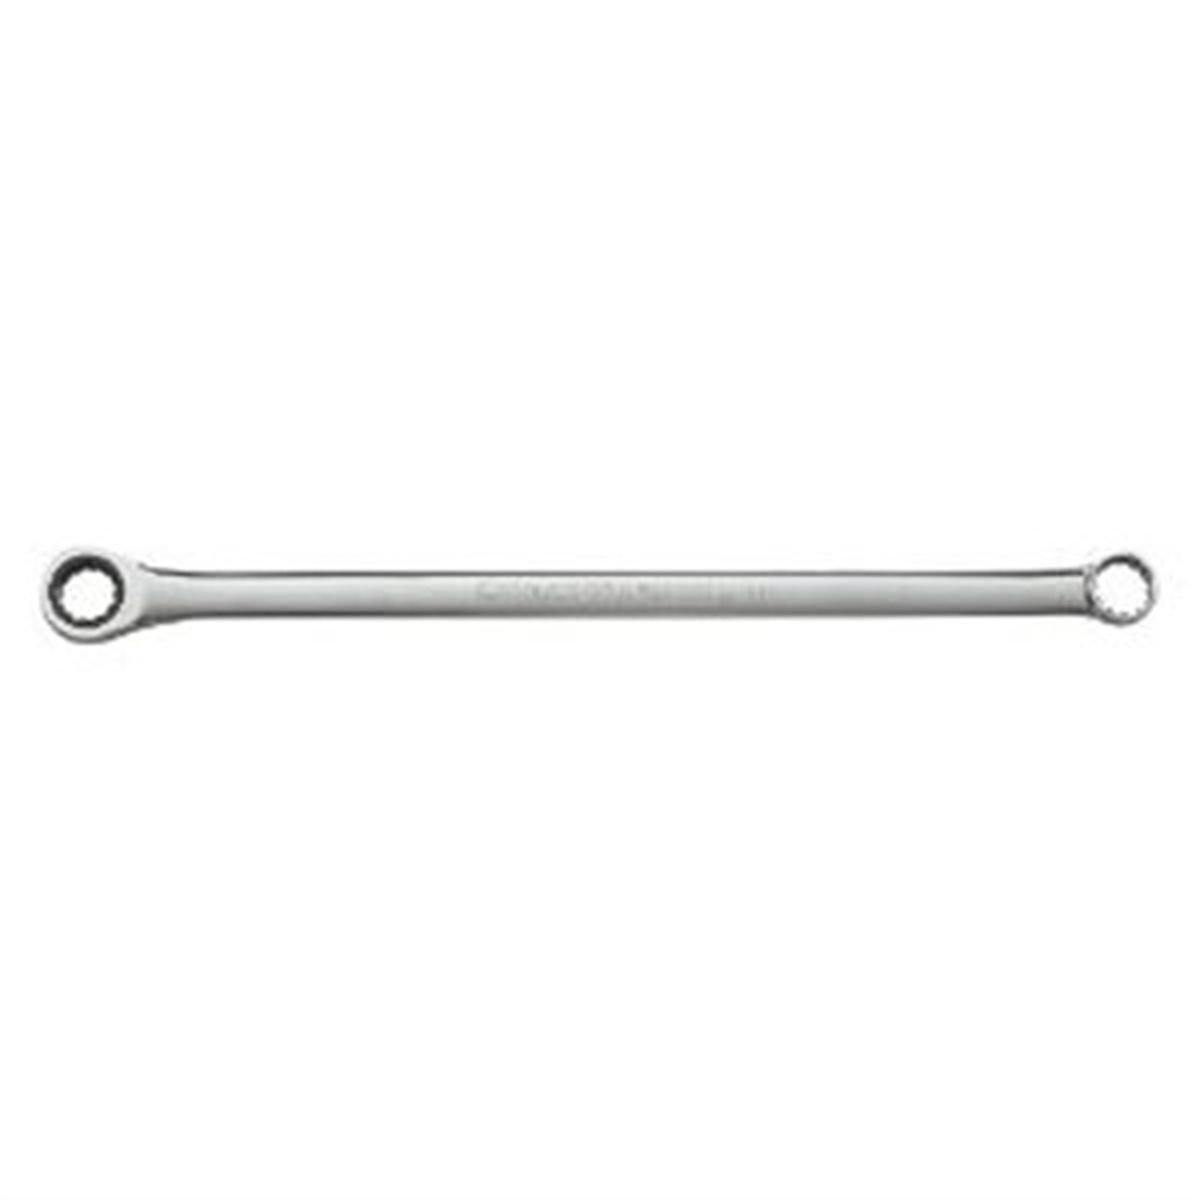 XL GearBox Double Box Ratcheting Wrench 7/16 Inch...